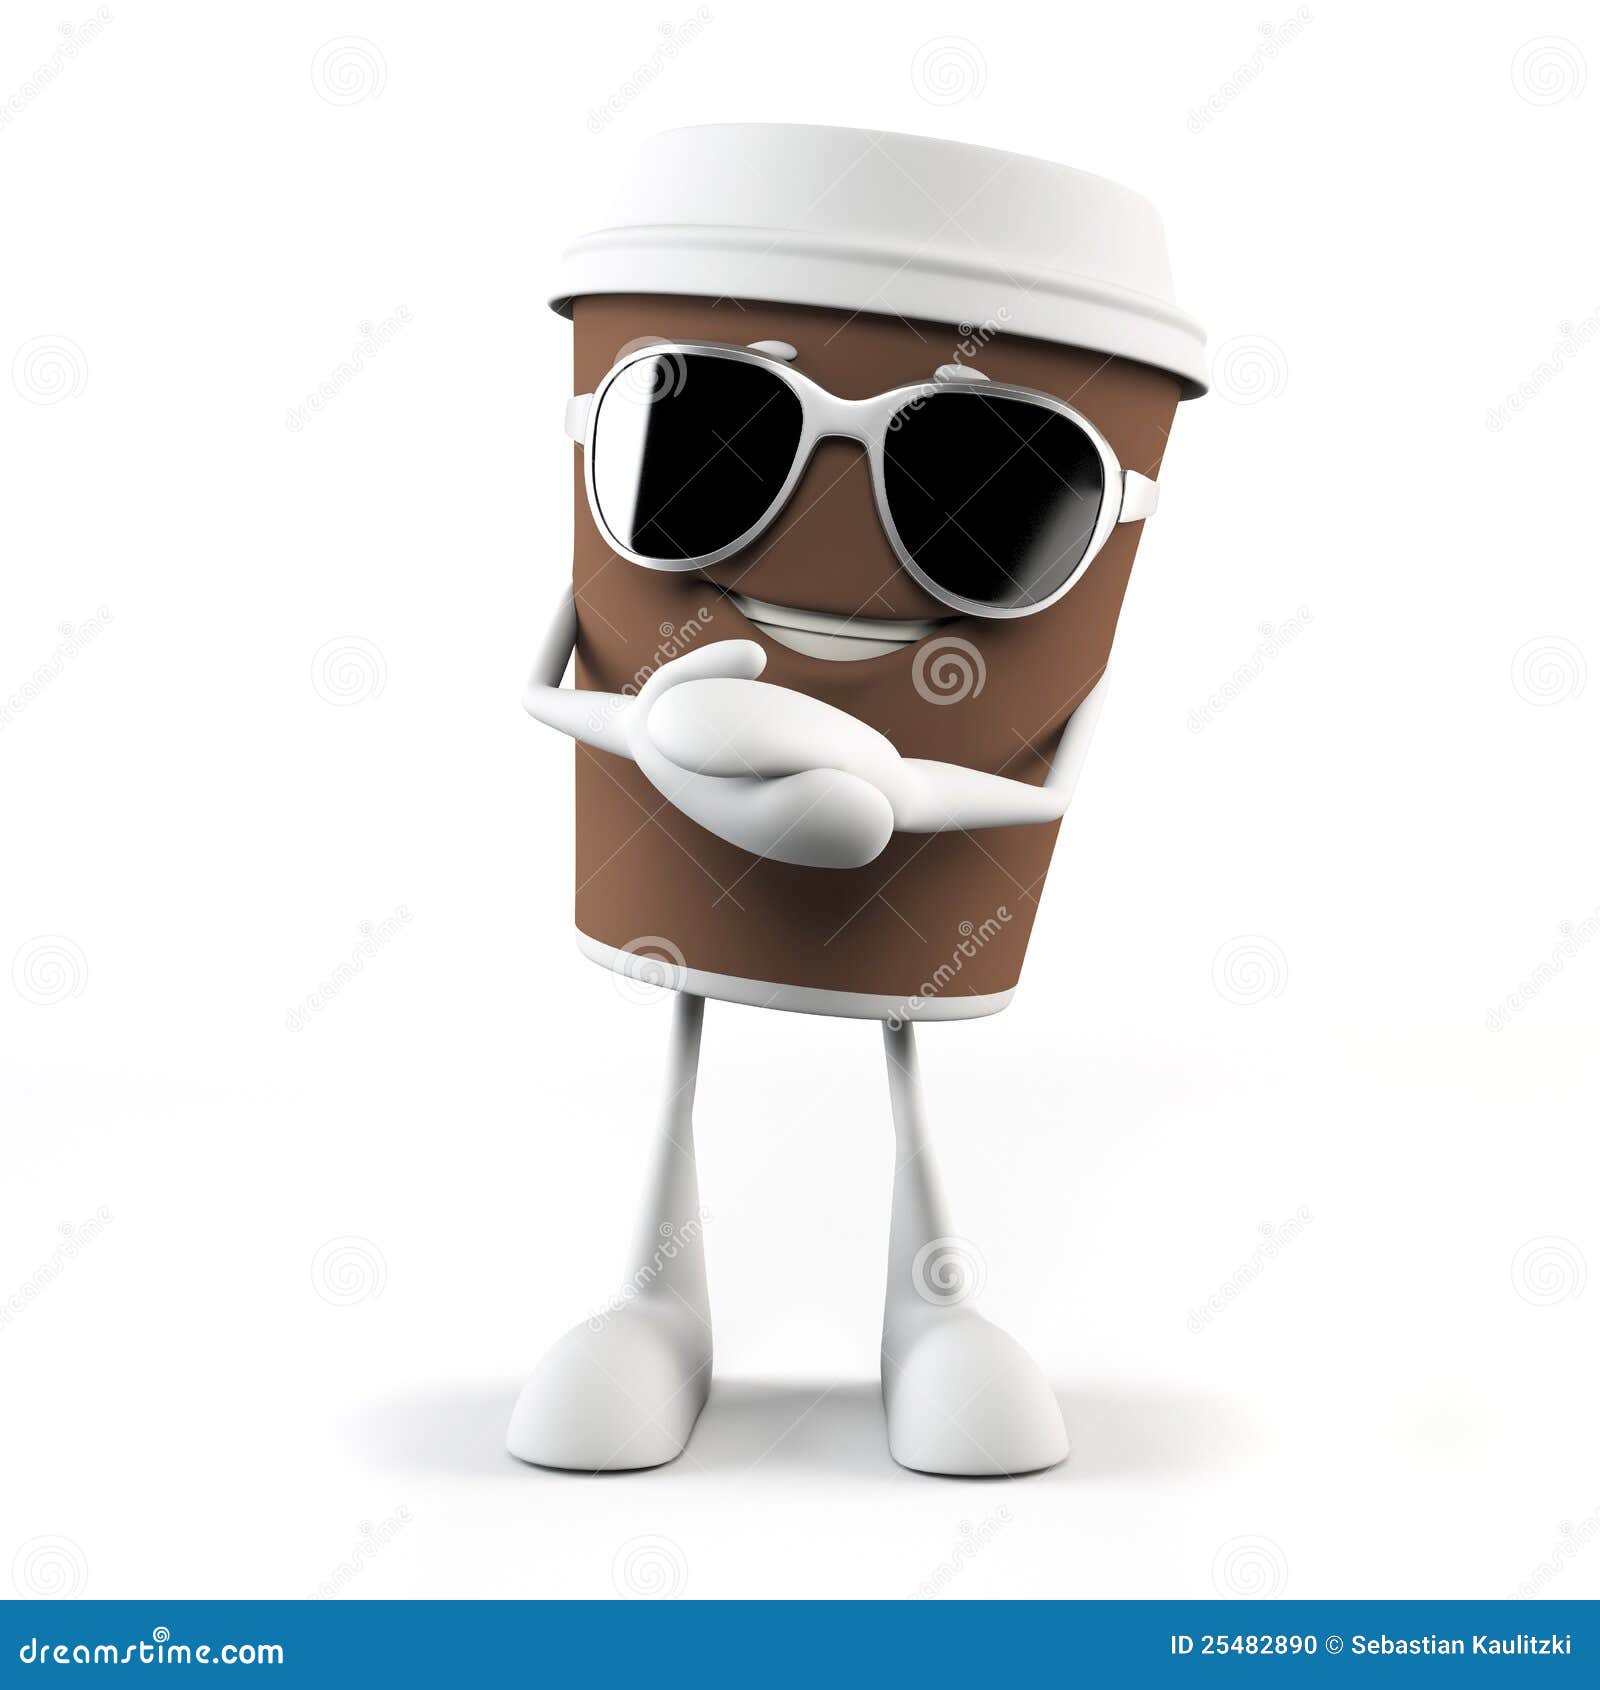 Funny coffee cup stock illustration. Image of drink, espresso - 25482890